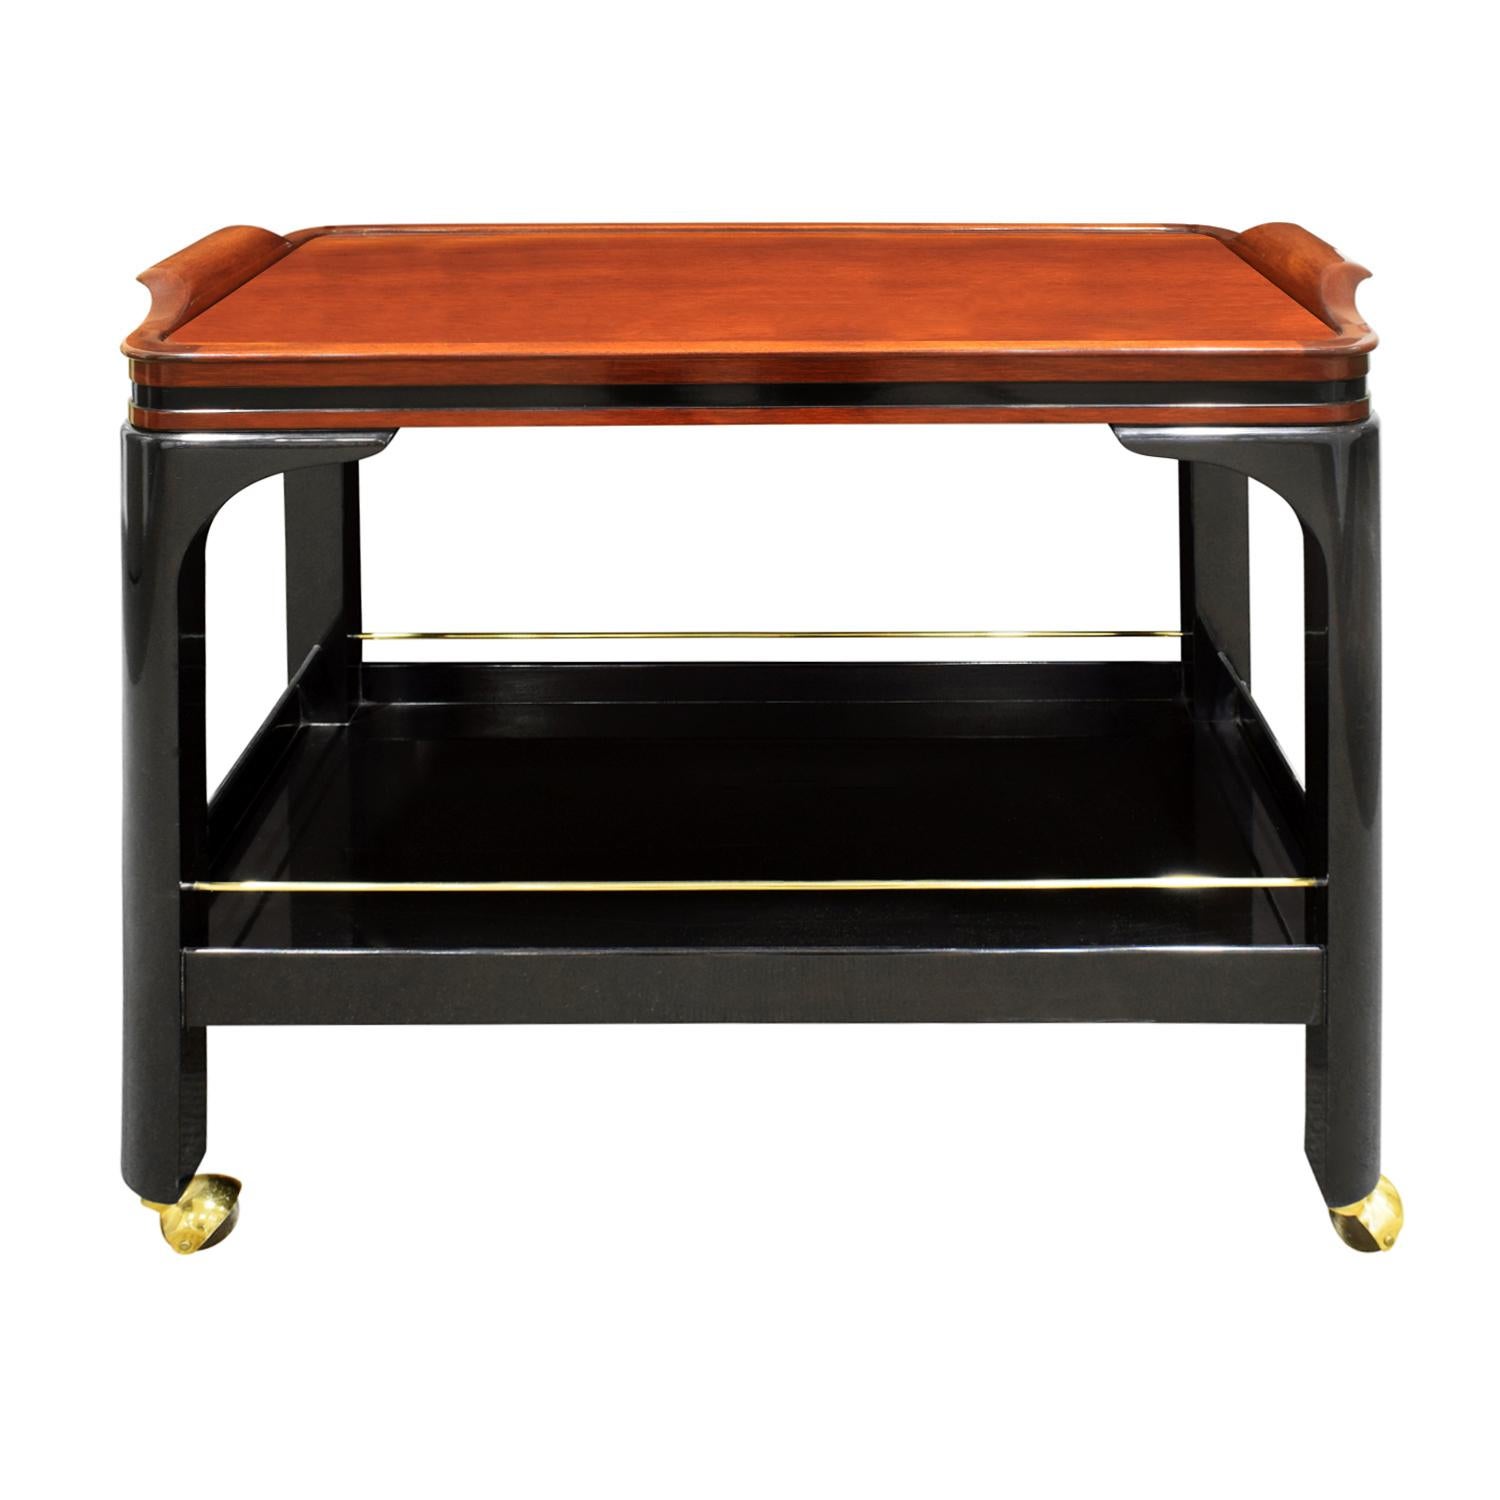 Rolling serving/bar cart model no. FM164 with black lacquer base and walnut top with brass accents and castors by Paul M. Jones, American 1960's.  This bar cart is beautifully made and very chic.

Reference:
Paul M Jones catalog published in the